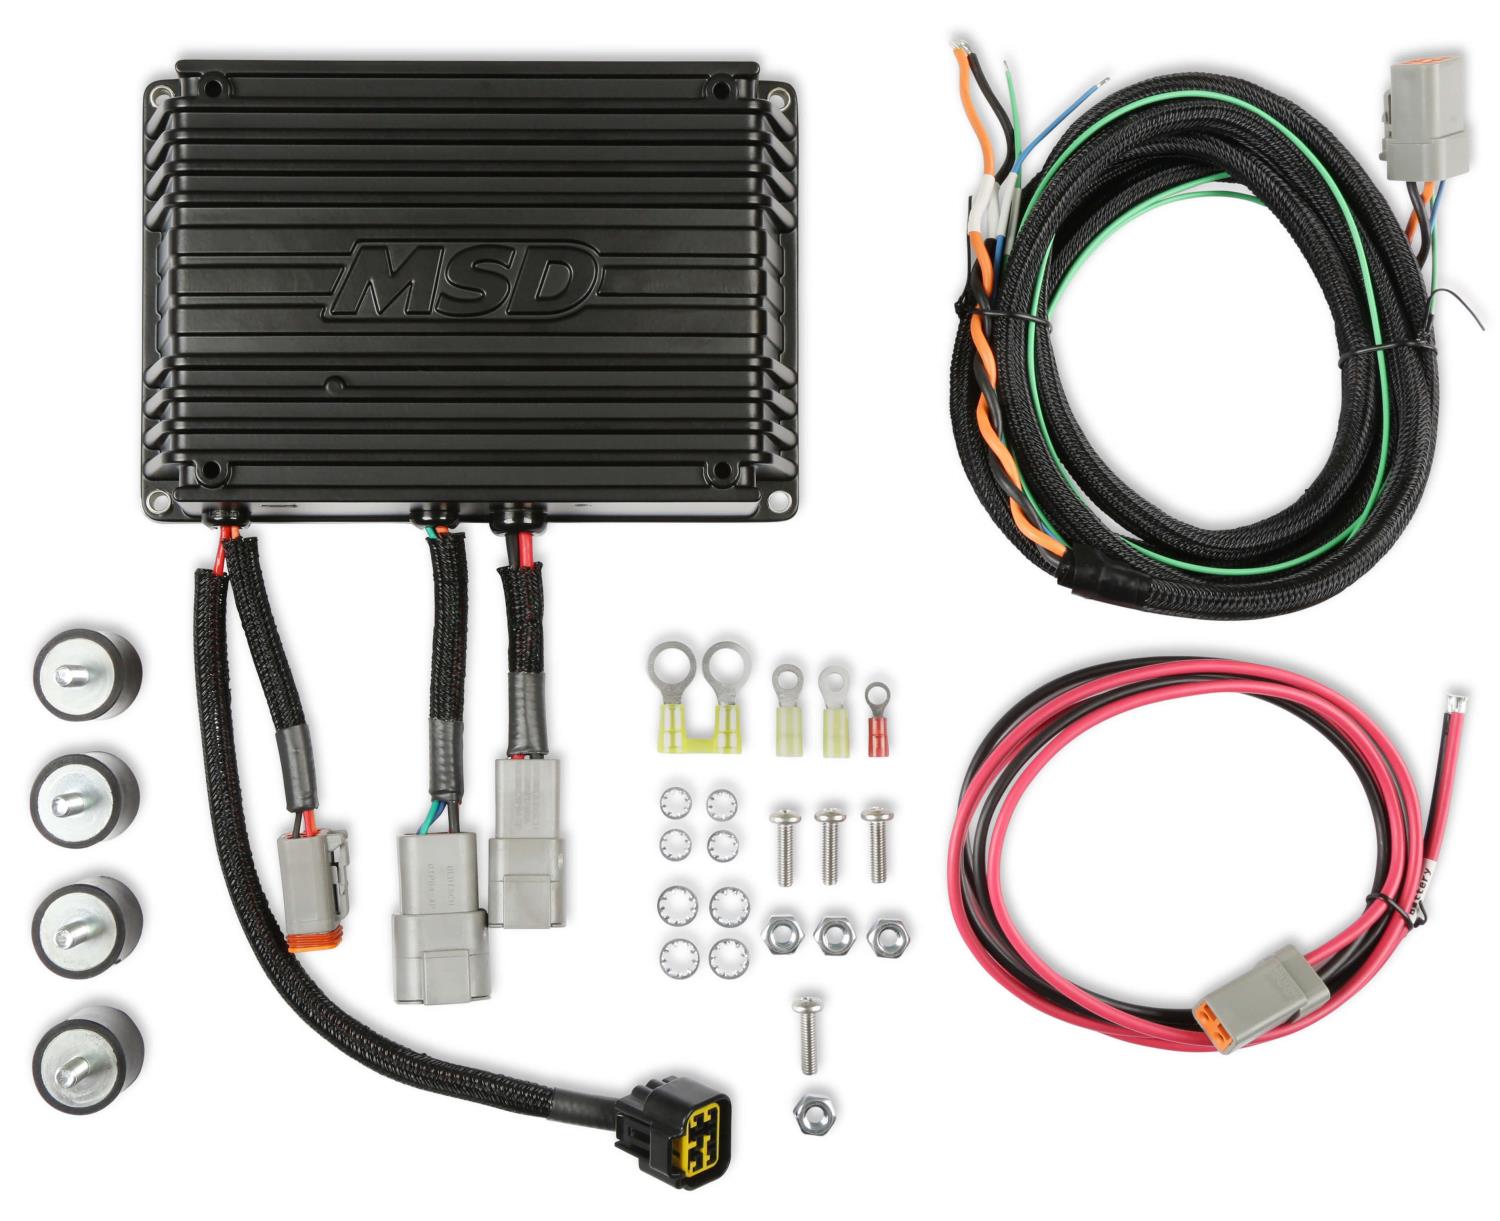 PRO 600 1-Channel Capacitive Discharge Ignition Box (CDI) for 4, 6, & 8-Cylinder Engines